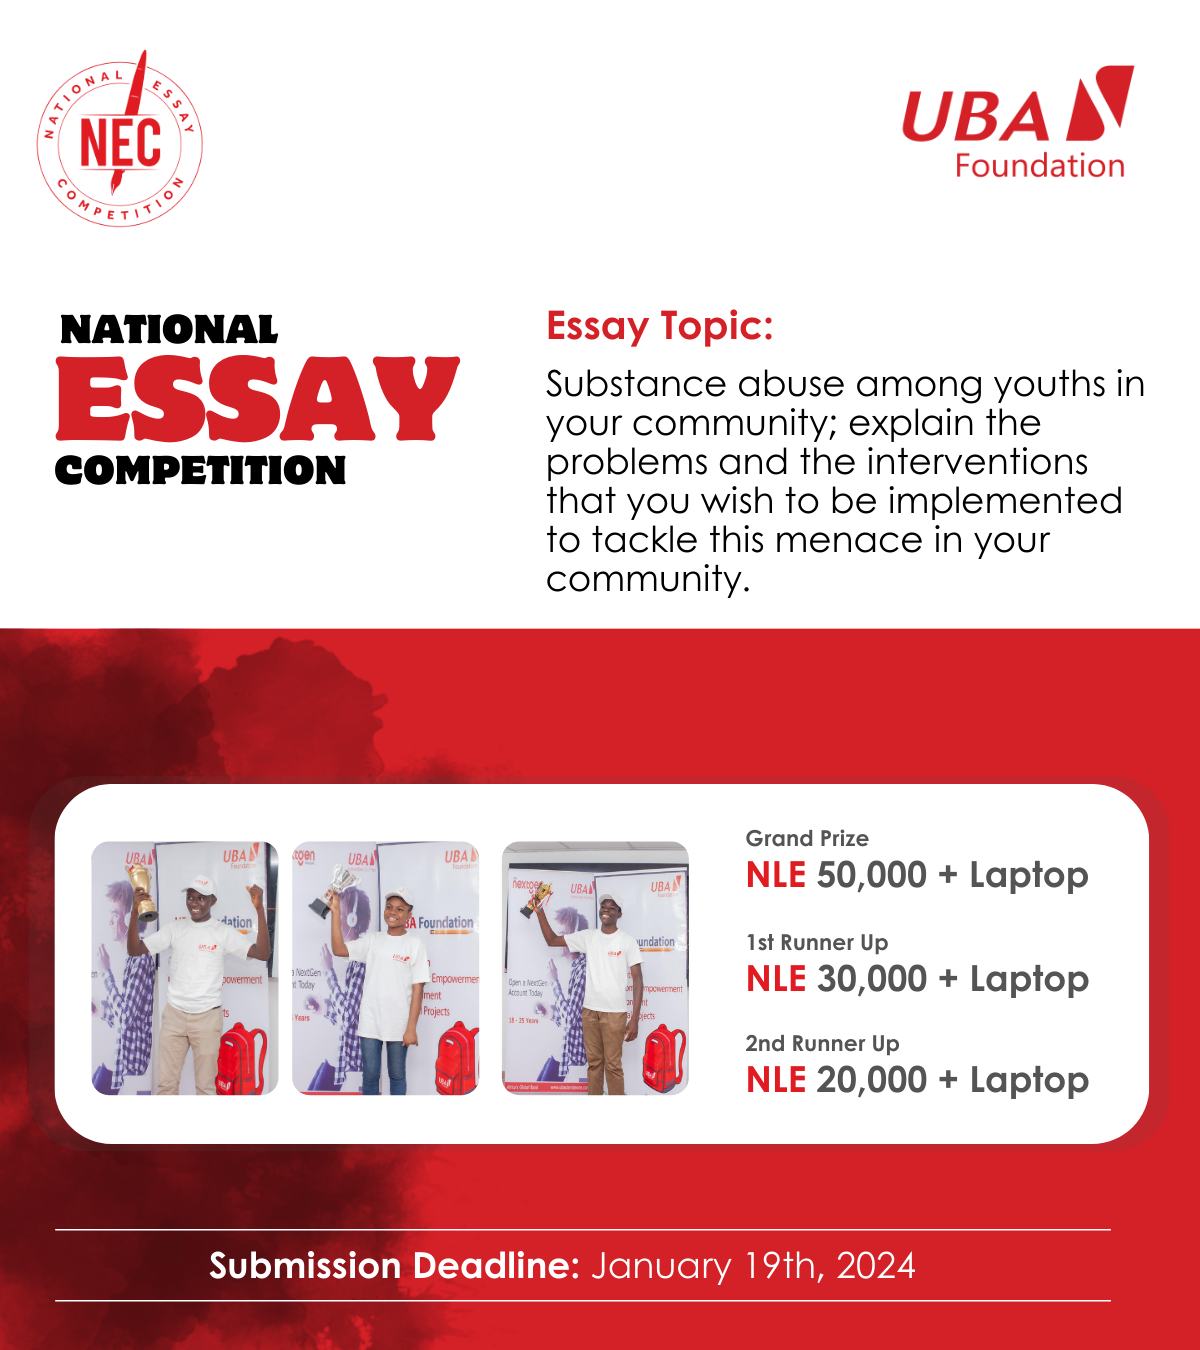 UBAF NEC 2023…  19 January is the deadline for submission of Essays